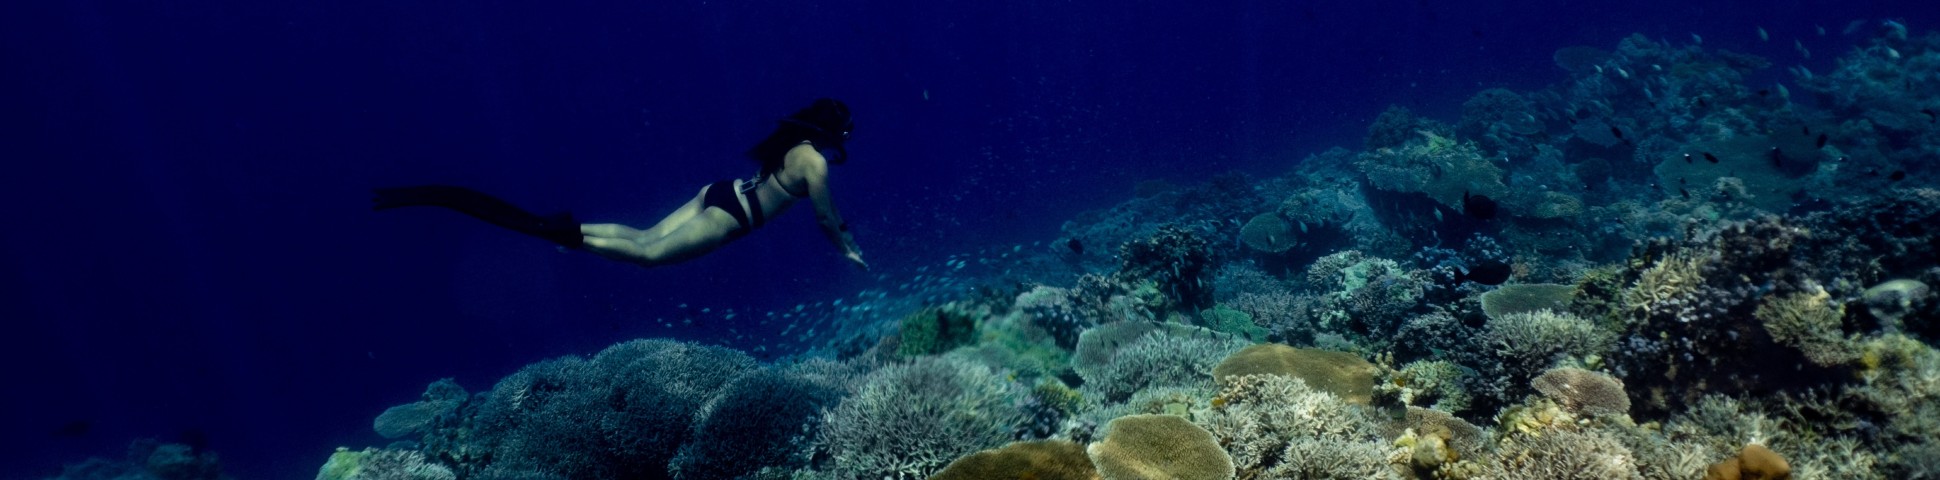 Lady snorkeling above the coral reef